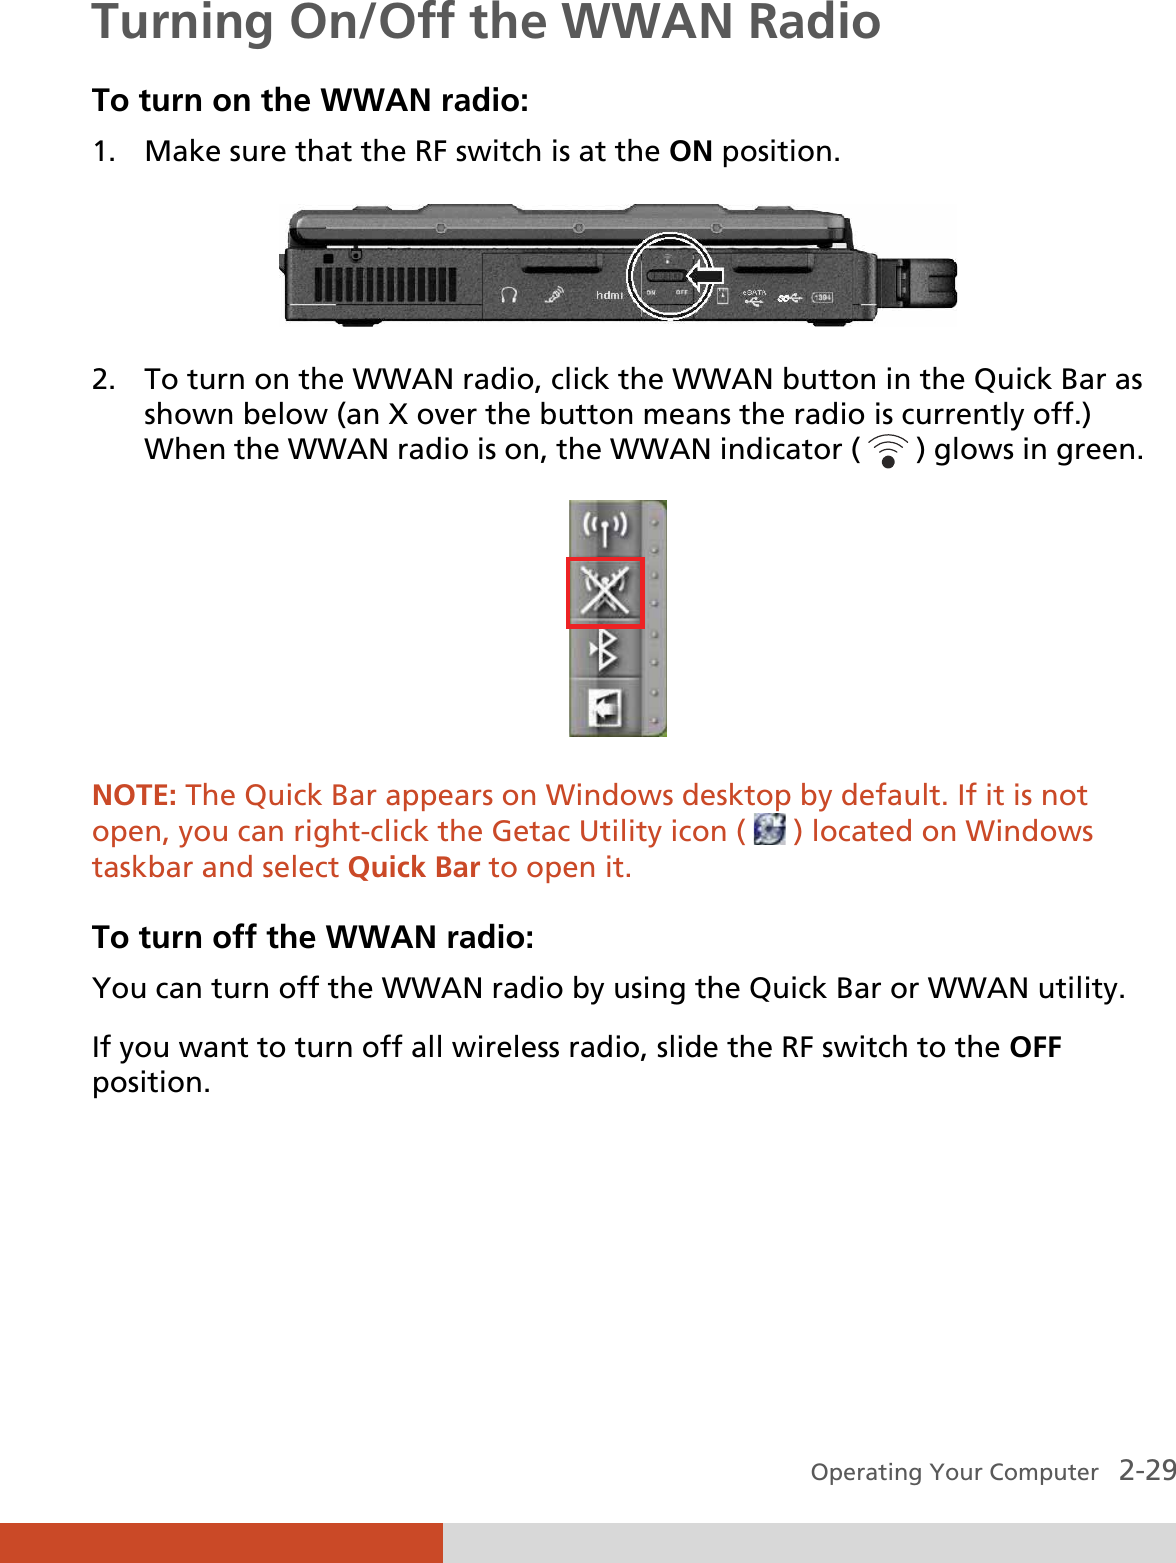  Operating Your Computer   2-29 Turning On/Off the WWAN Radio To turn on the WWAN radio: 1. Make sure that the RF switch is at the ON position.  2. To turn on the WWAN radio, click the WWAN button in the Quick Bar as shown below (an X over the button means the radio is currently off.) When the WWAN radio is on, the WWAN indicator (   ) glows in green.  NOTE: The Quick Bar appears on Windows desktop by default. If it is not open, you can right-click the Getac Utility icon (   ) located on Windows taskbar and select Quick Bar to open it.  To turn off the WWAN radio: You can turn off the WWAN radio by using the Quick Bar or WWAN utility. If you want to turn off all wireless radio, slide the RF switch to the OFF position.    